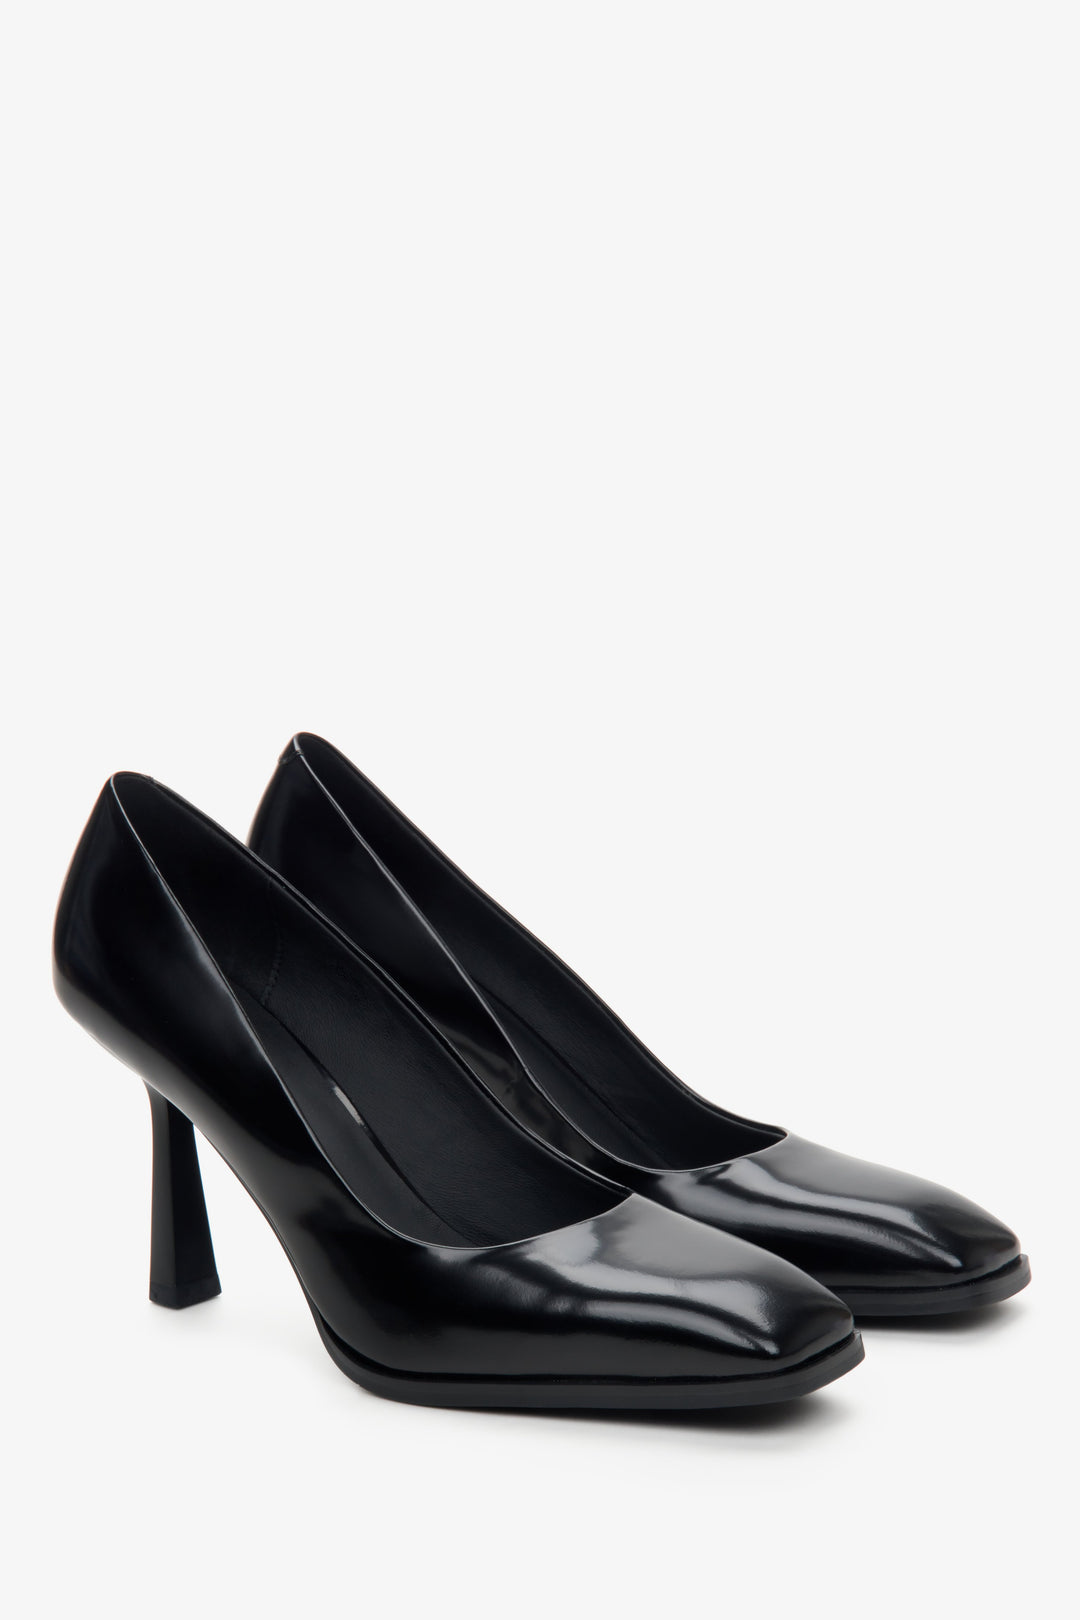 Estro women's black leather high-heeled shoes.